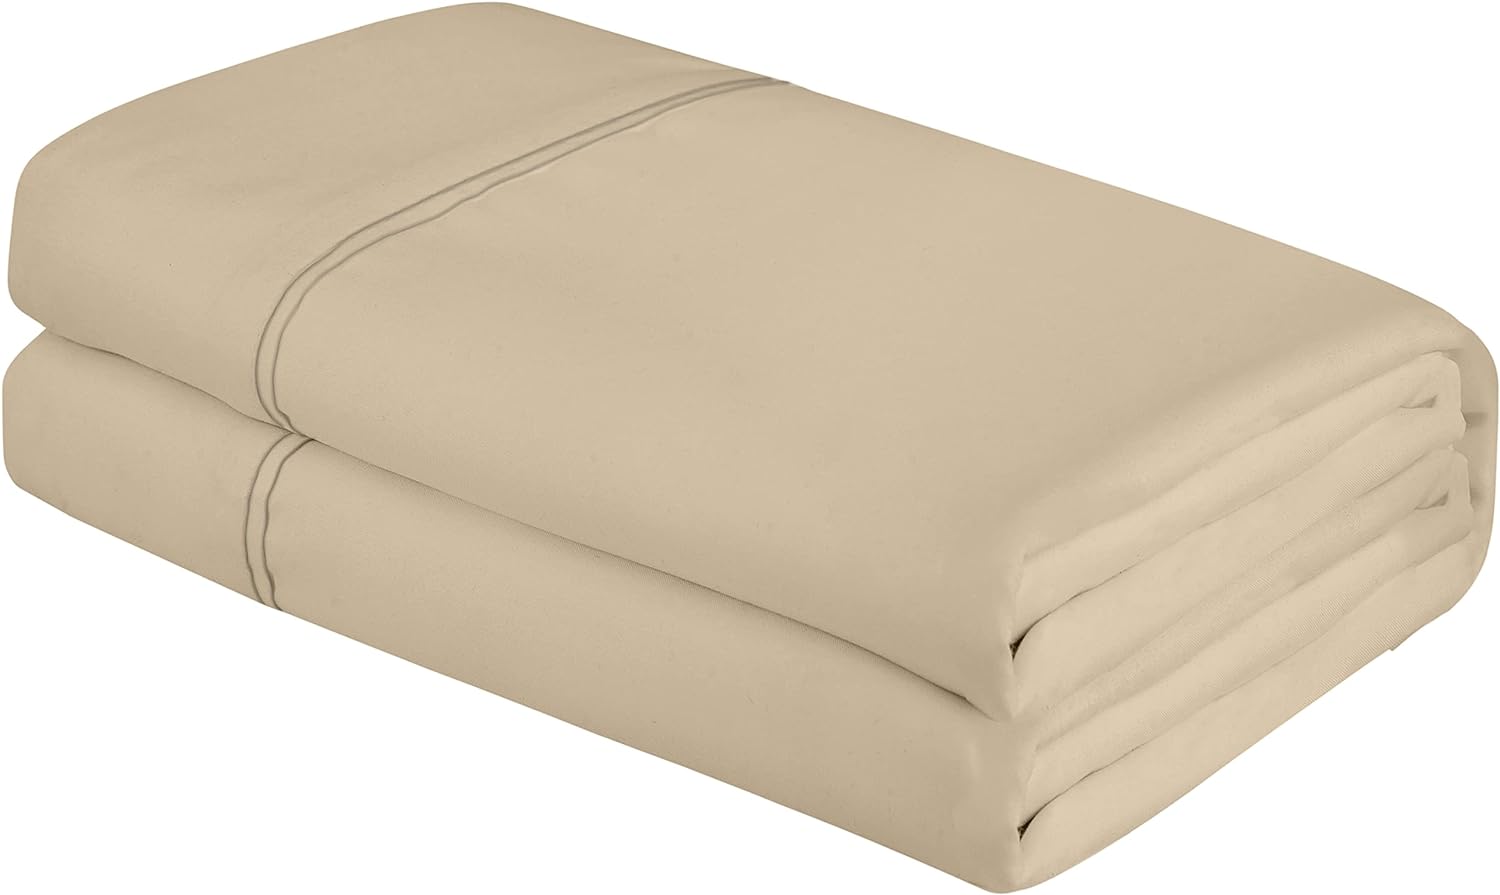 Royale Linens Queen Size Flat Sheet Only - Brushed 1800 Microfiber - Ultra Soft & Breathable - Wrinkle & Stain Resistant - Hotel Quality Flat Sheet Sold Separately - Top Sheet for Bed - (Queen, Sand)